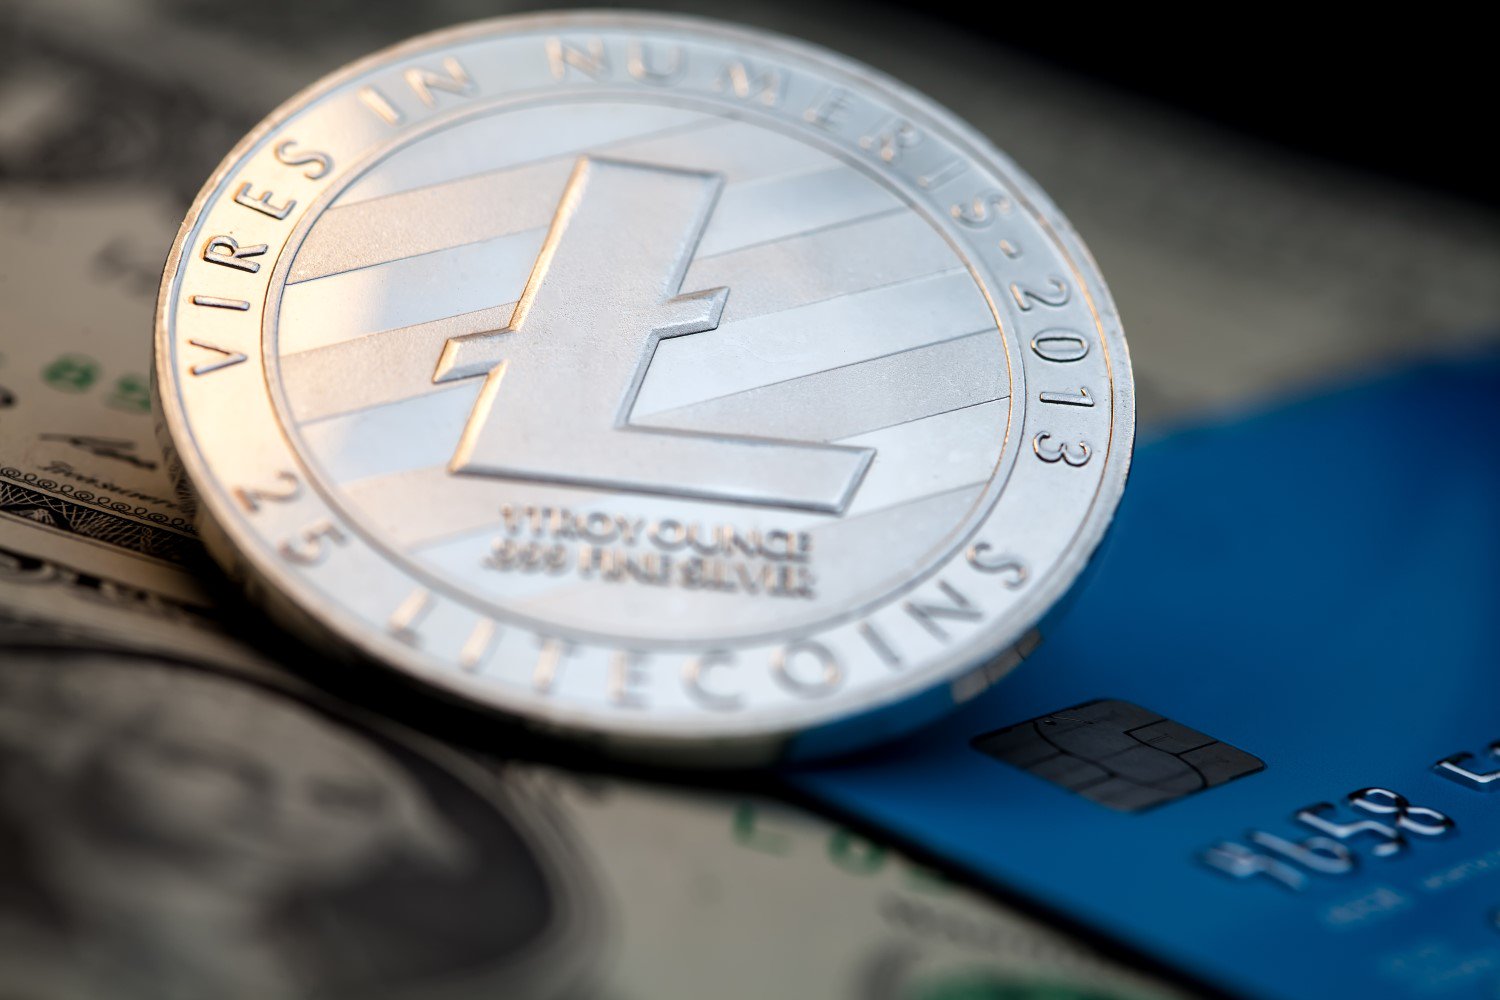 HTC Says Its Crypto-Friendly Smartphone Will Support Litecoin